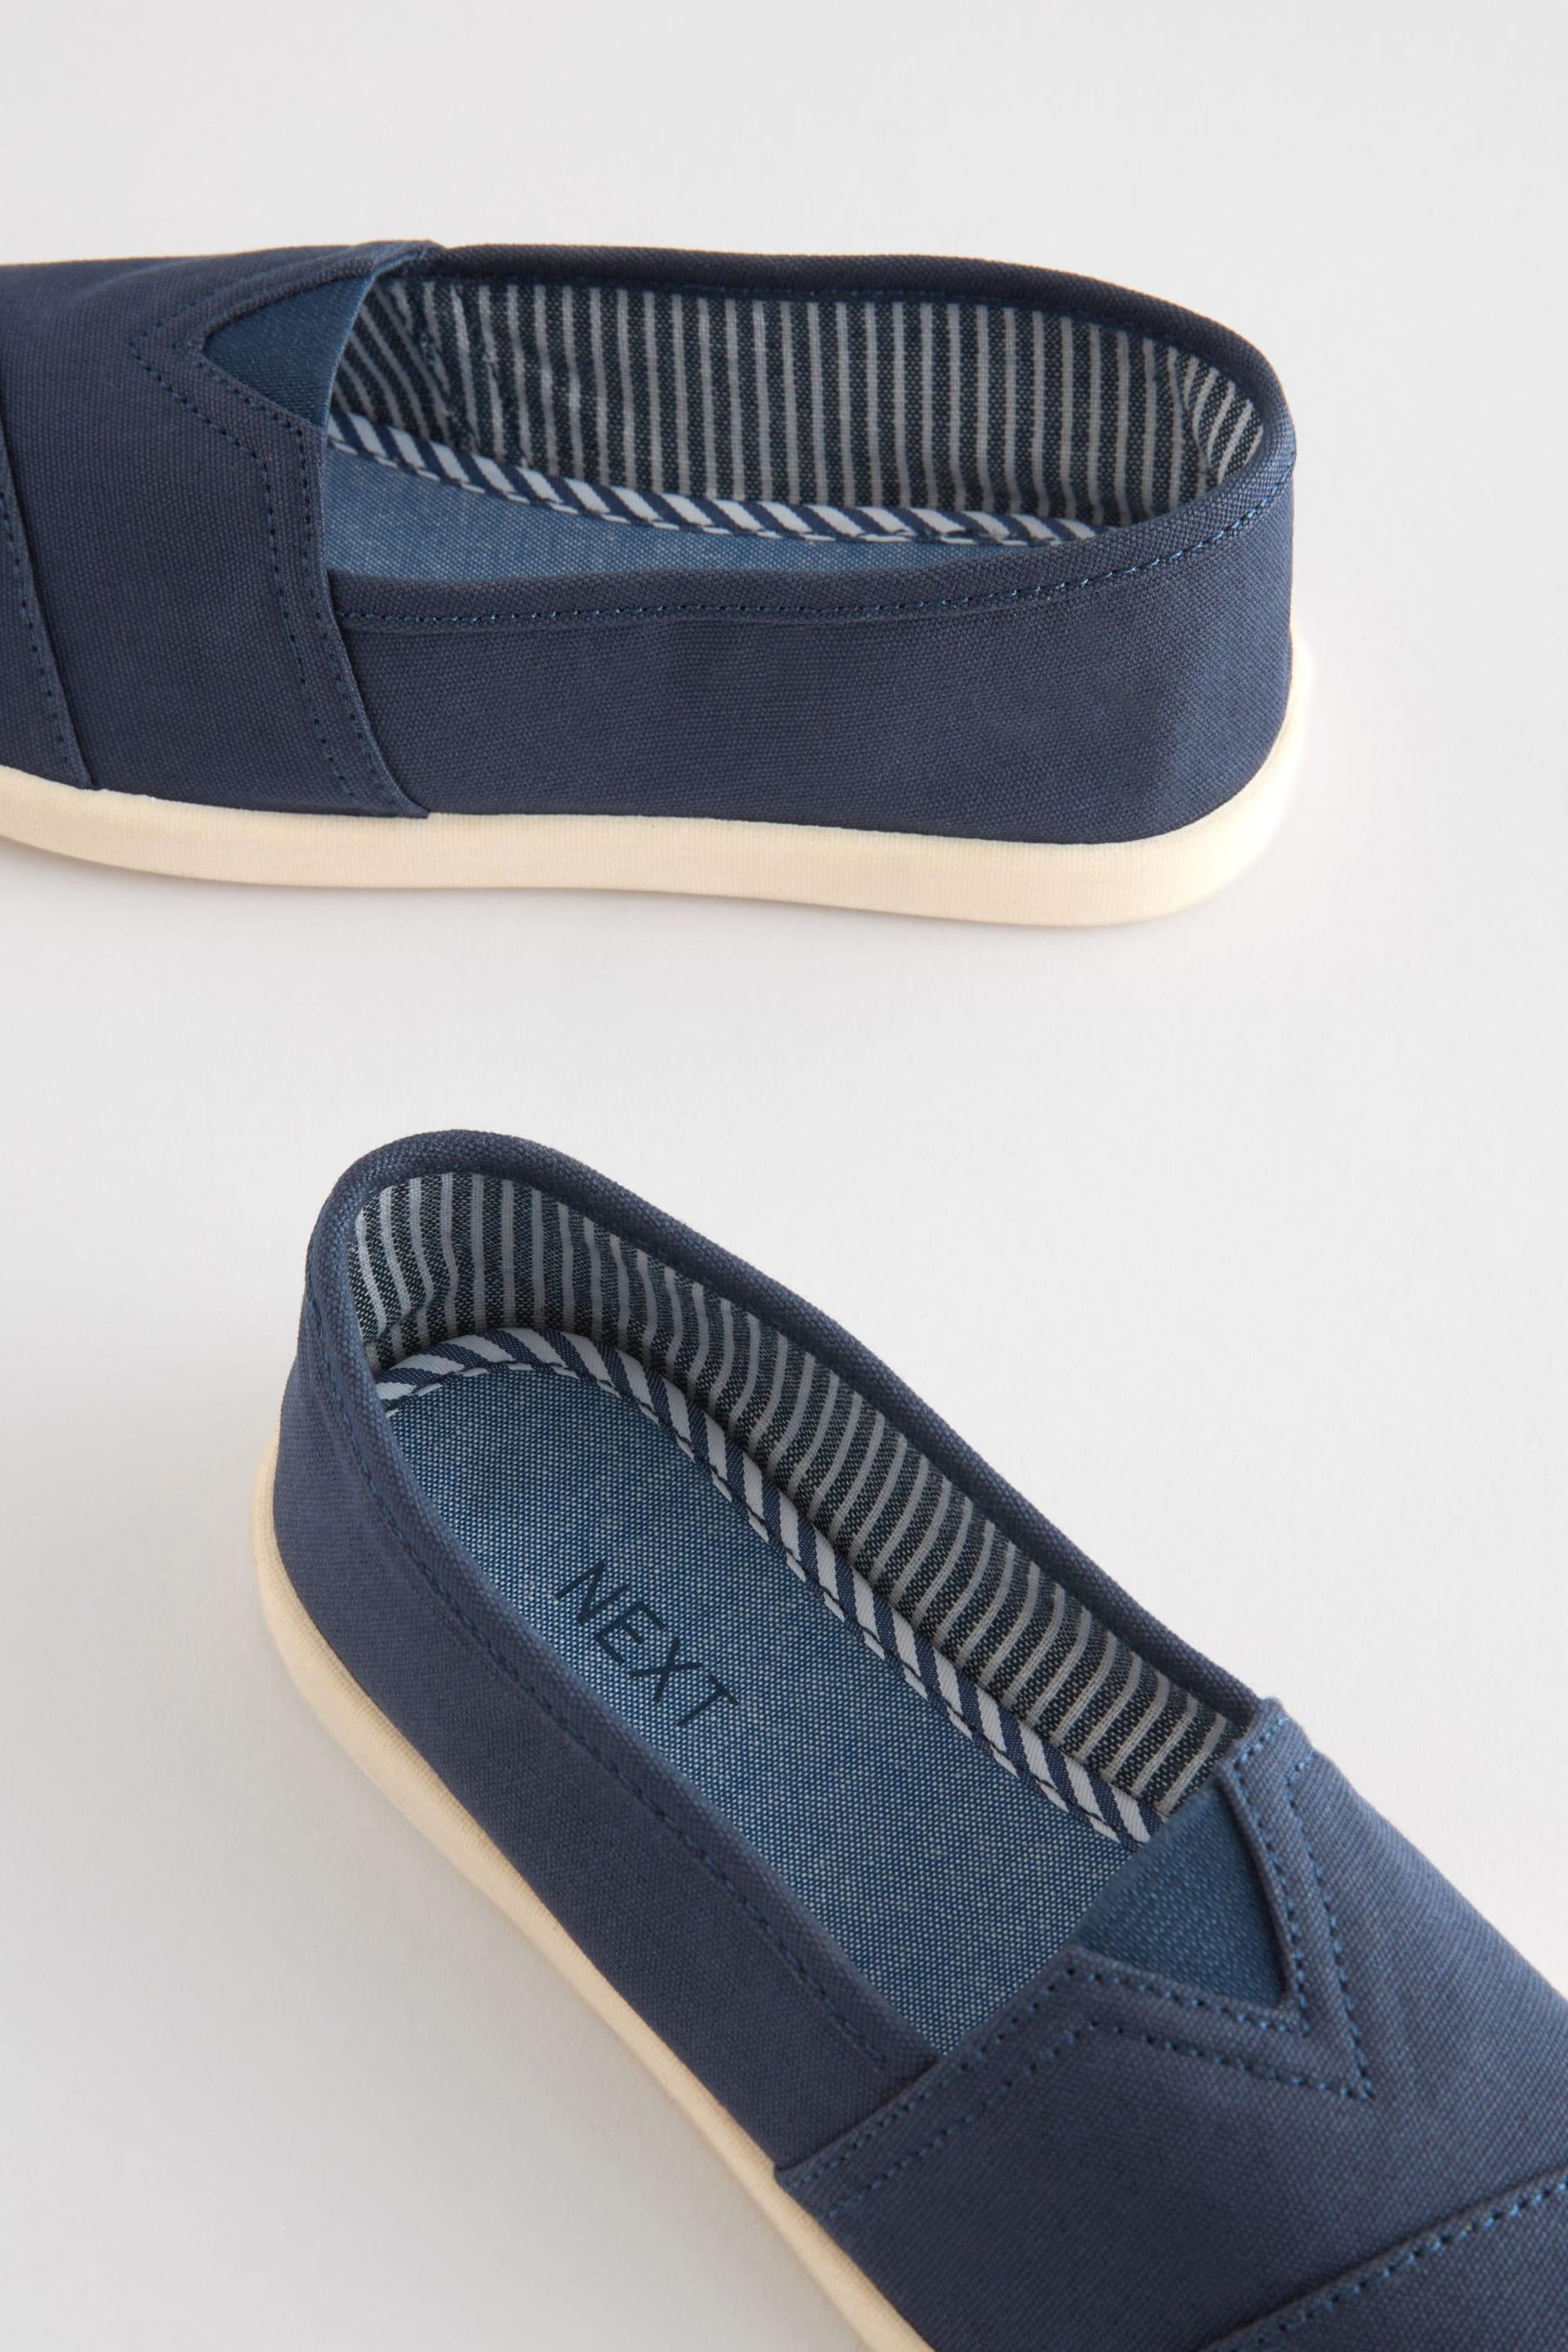 Navy Blue Canvas Slip-Ons Shoes - Image 3 of 4